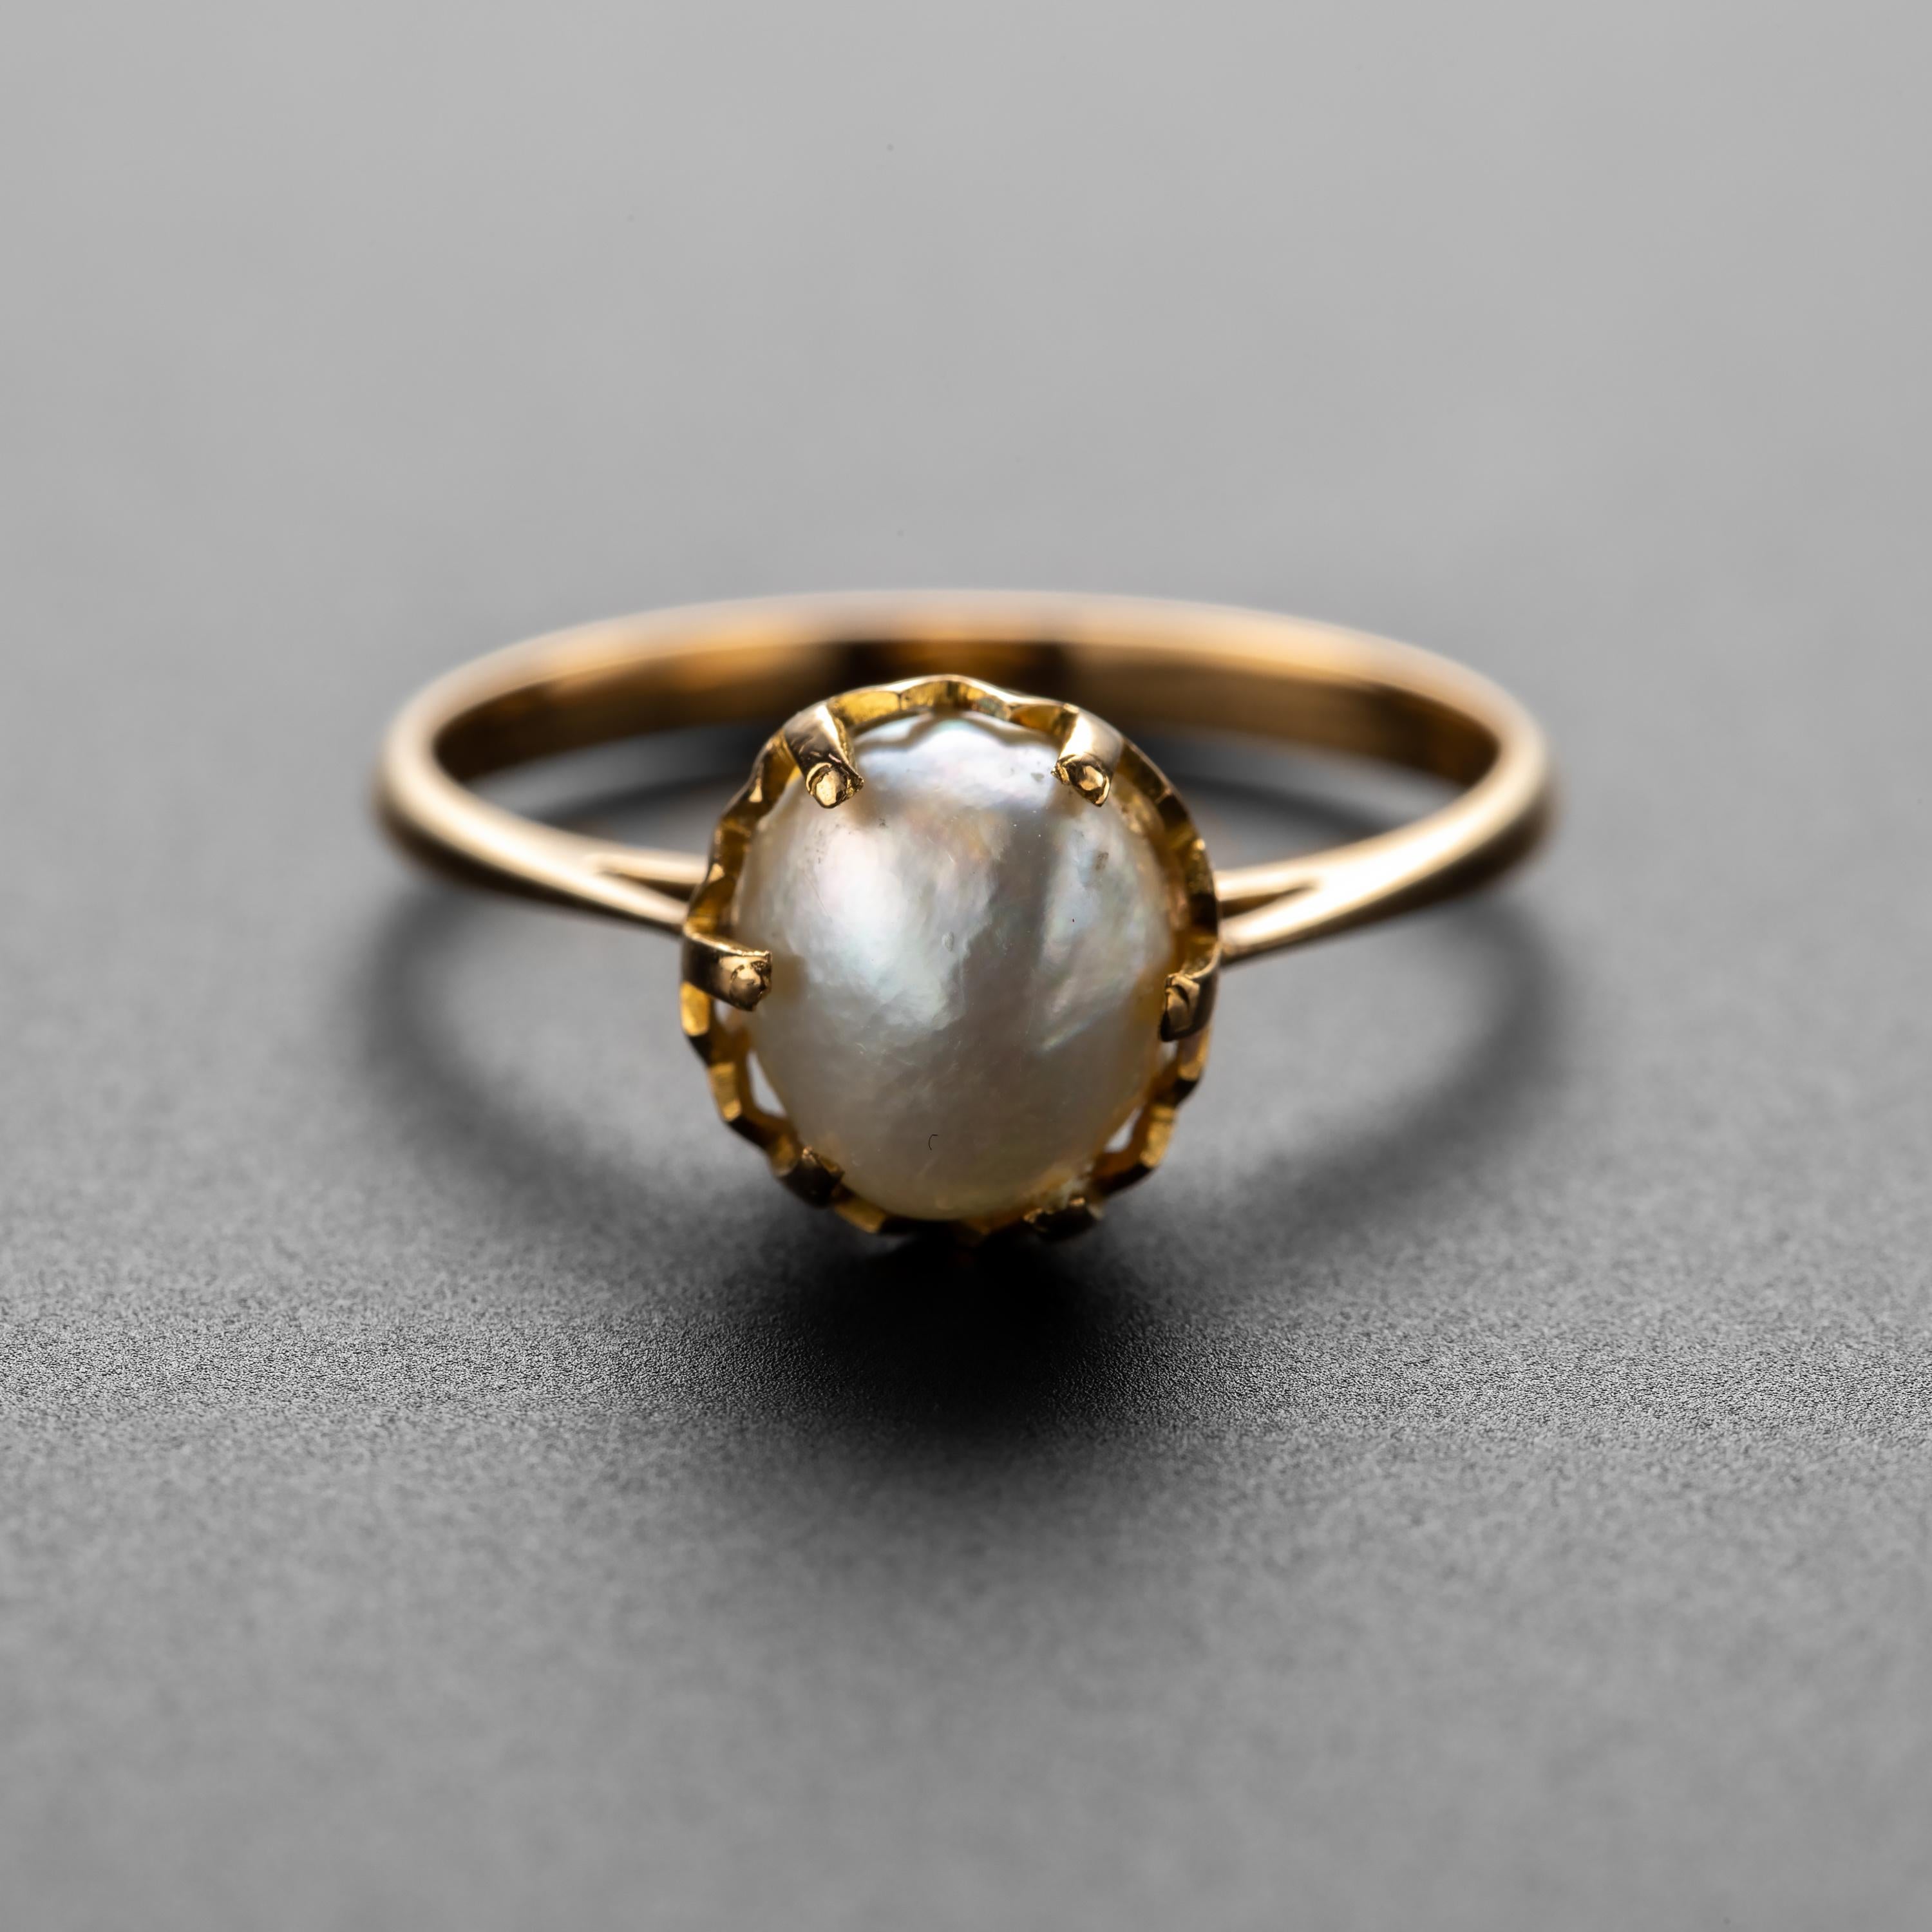 A glorious, pure, and natural uncultured and undrilled saltwater pearl resides within the secure grip of regal prongs in this fabulous ring from the late Victorian era (circa 1900). Purchased in England but bearing no hallmarks, this 18K yellow gold